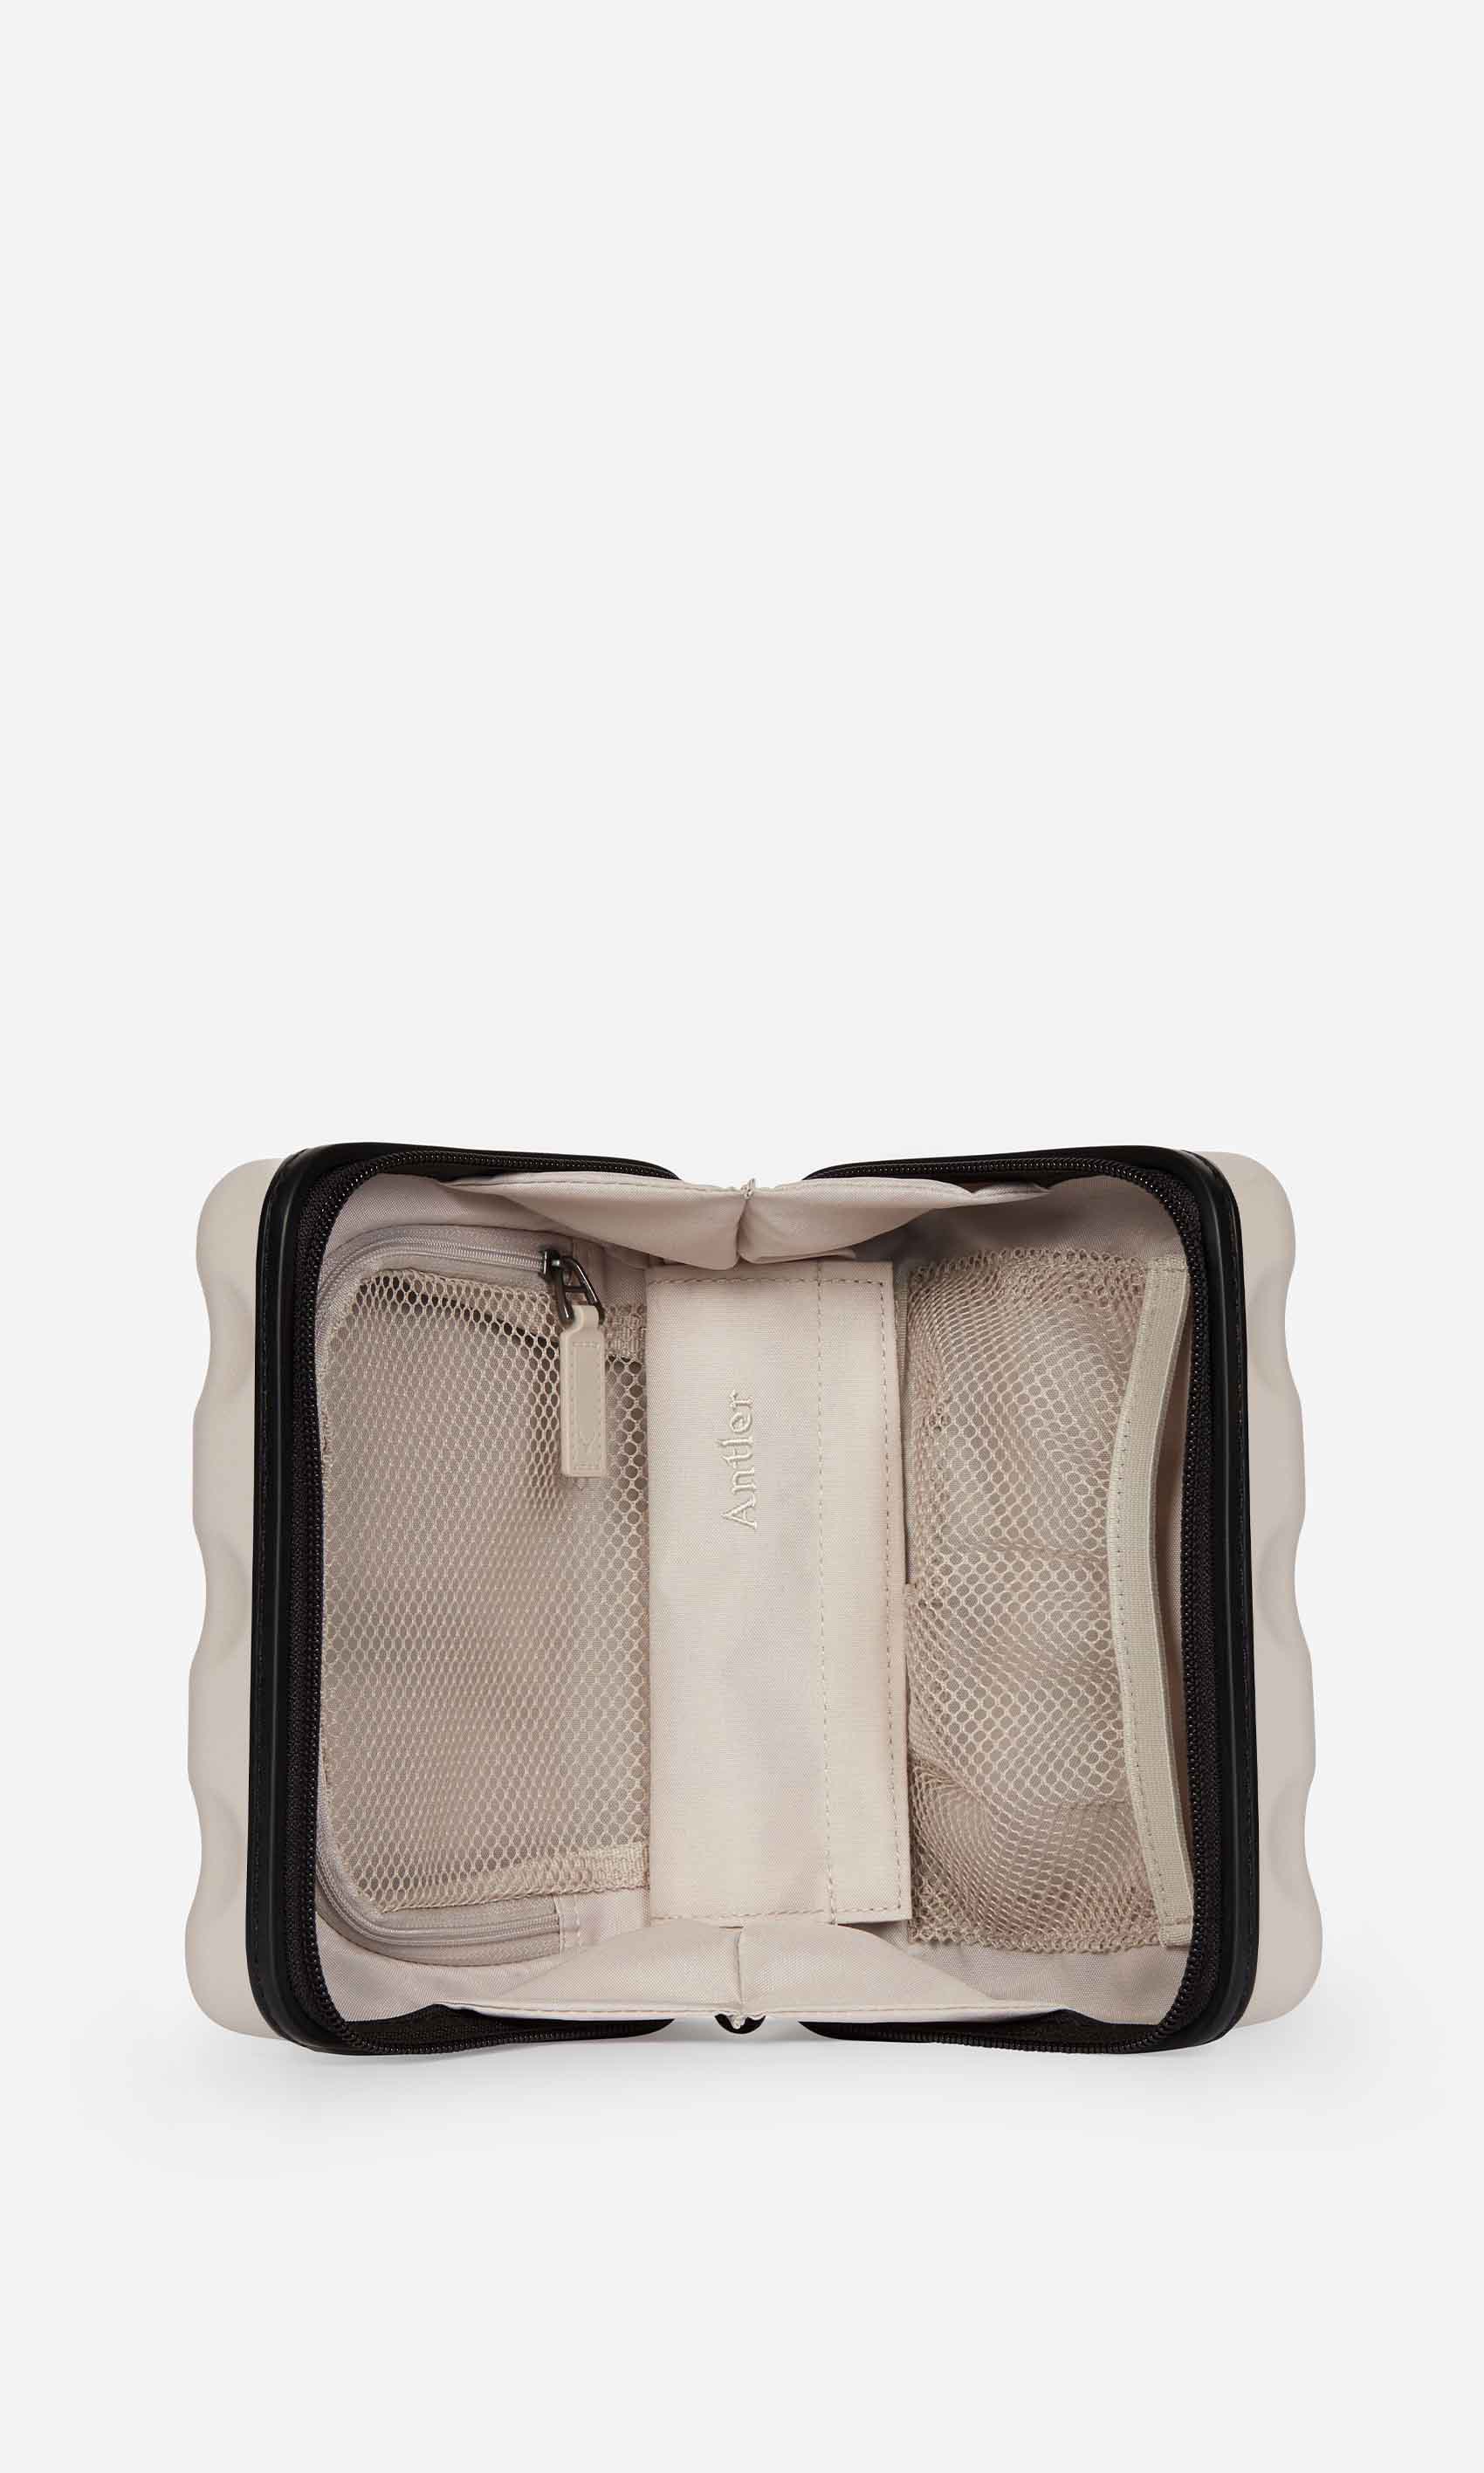 Antler Luggage -  Clifton mini in taupe - Hard Suitcases Clifton Mini Case Taupe (Beige) | Travel Gifts & Accessories | Antler